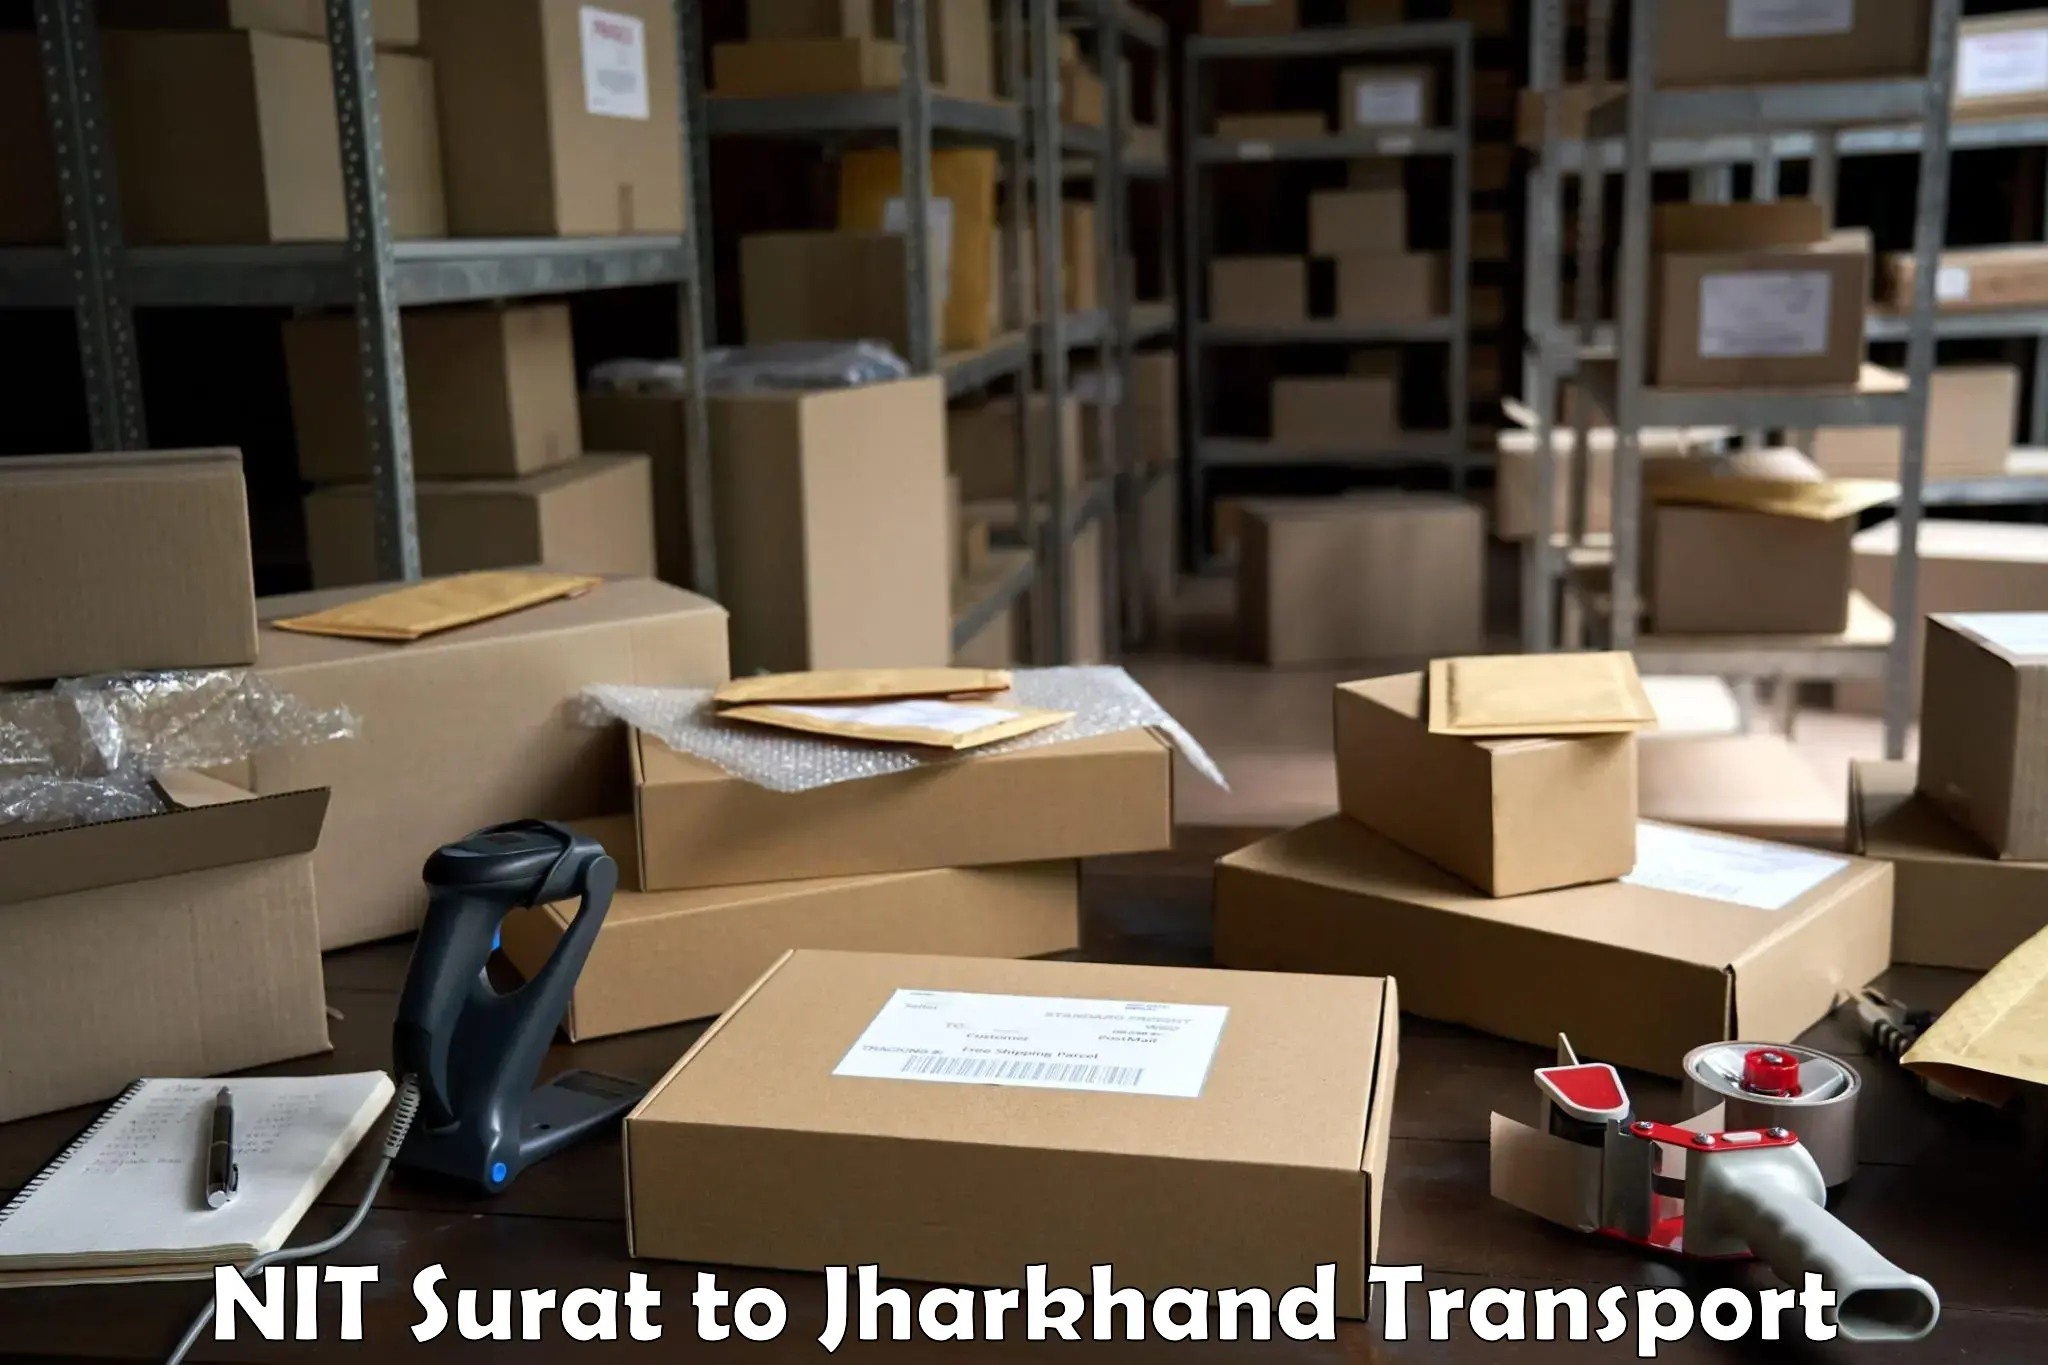 Parcel transport services NIT Surat to Jharkhand